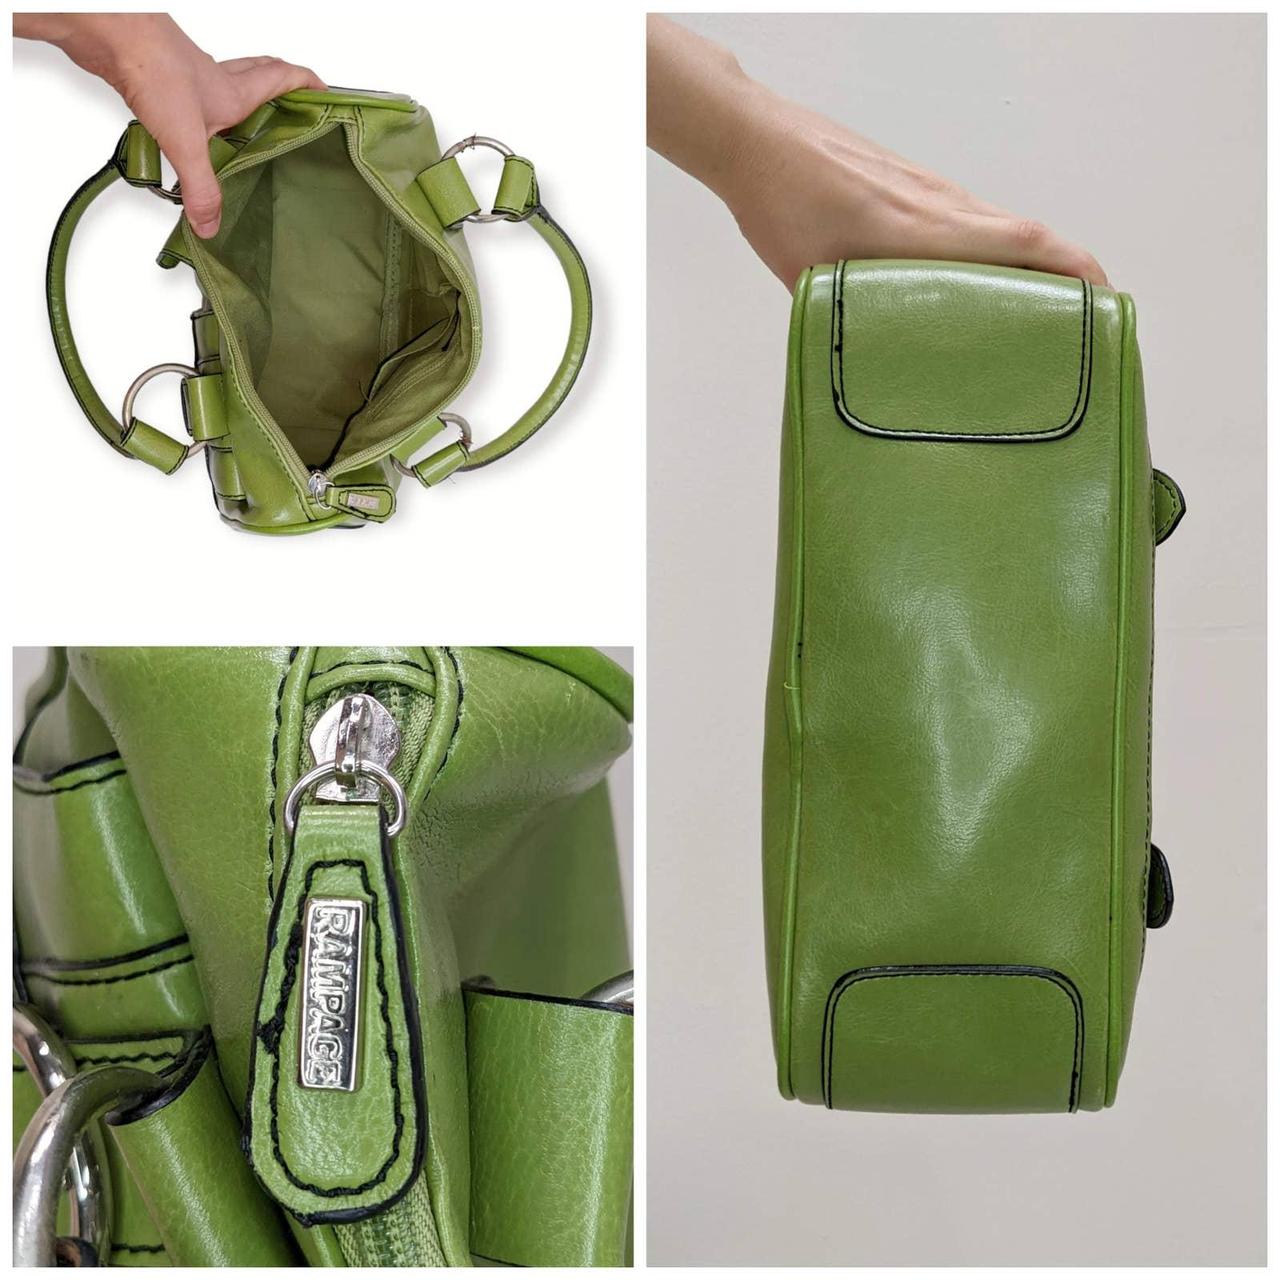 Product Image 4 - Y2K Rampage Green Hand Bag

-